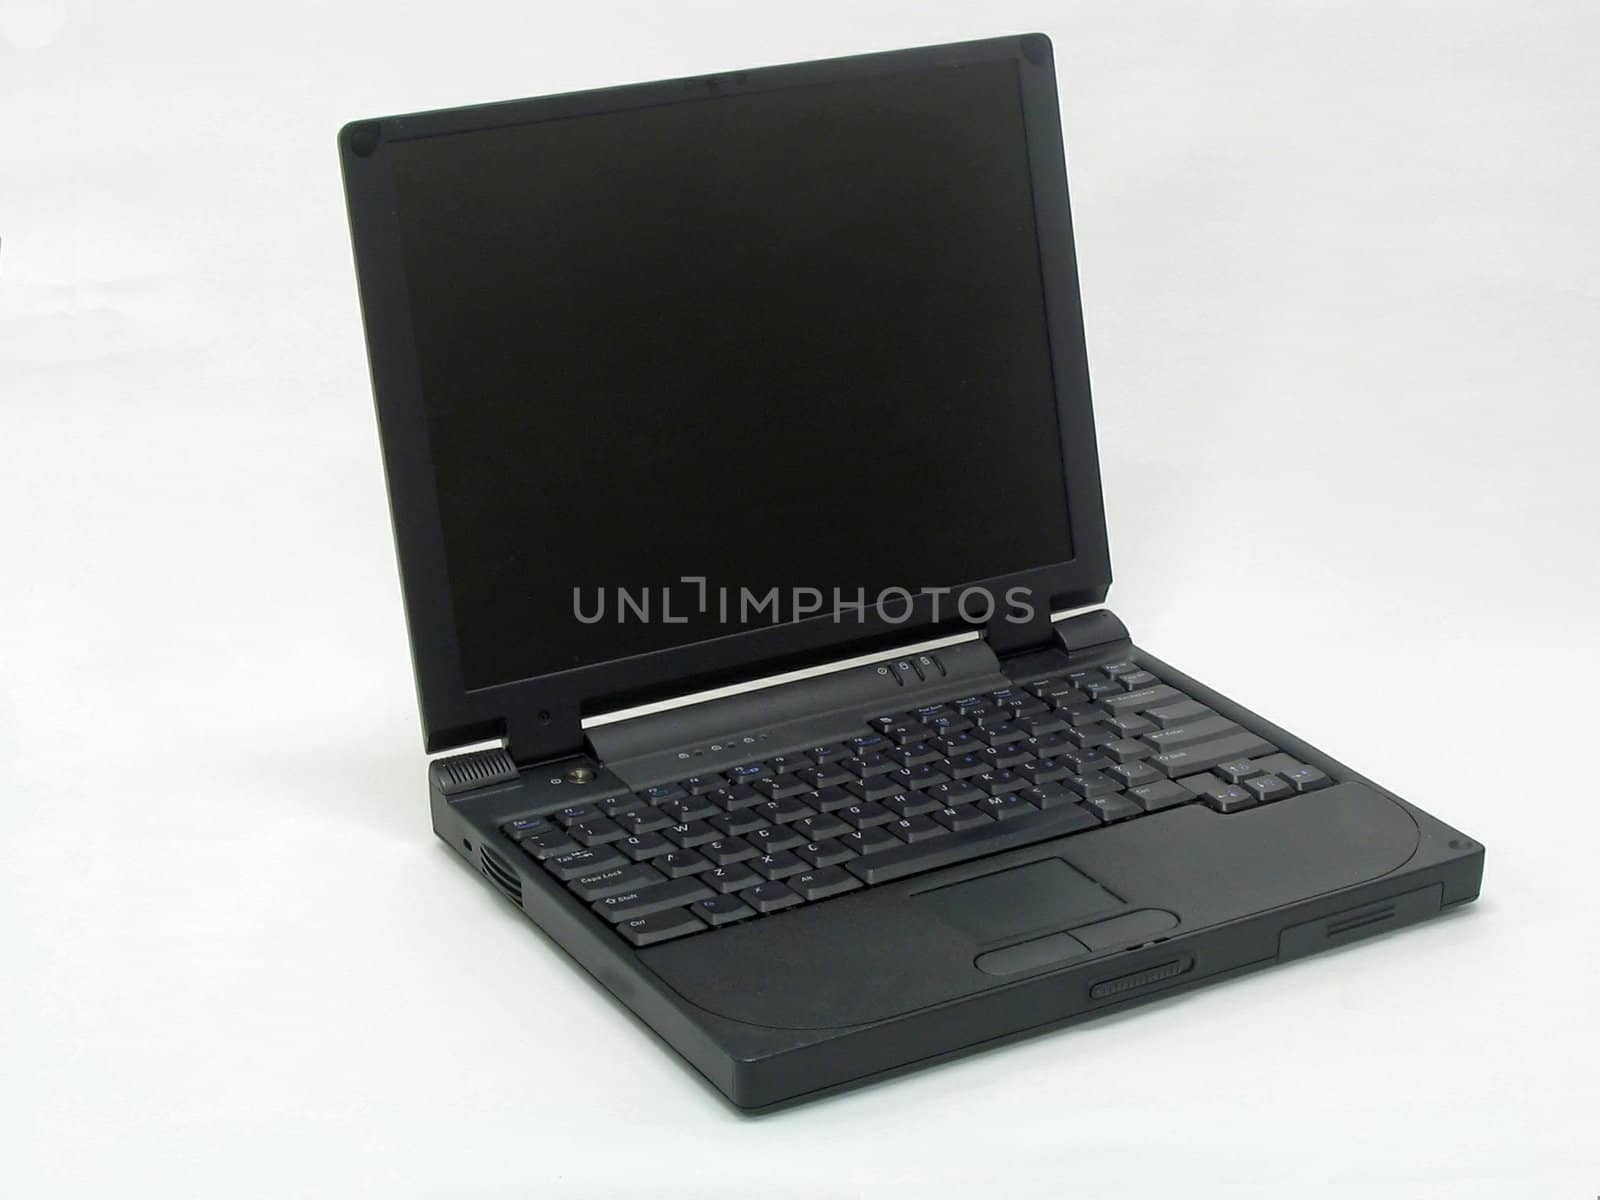 This is a picture of a black laptop personal computer isolated on a white background.